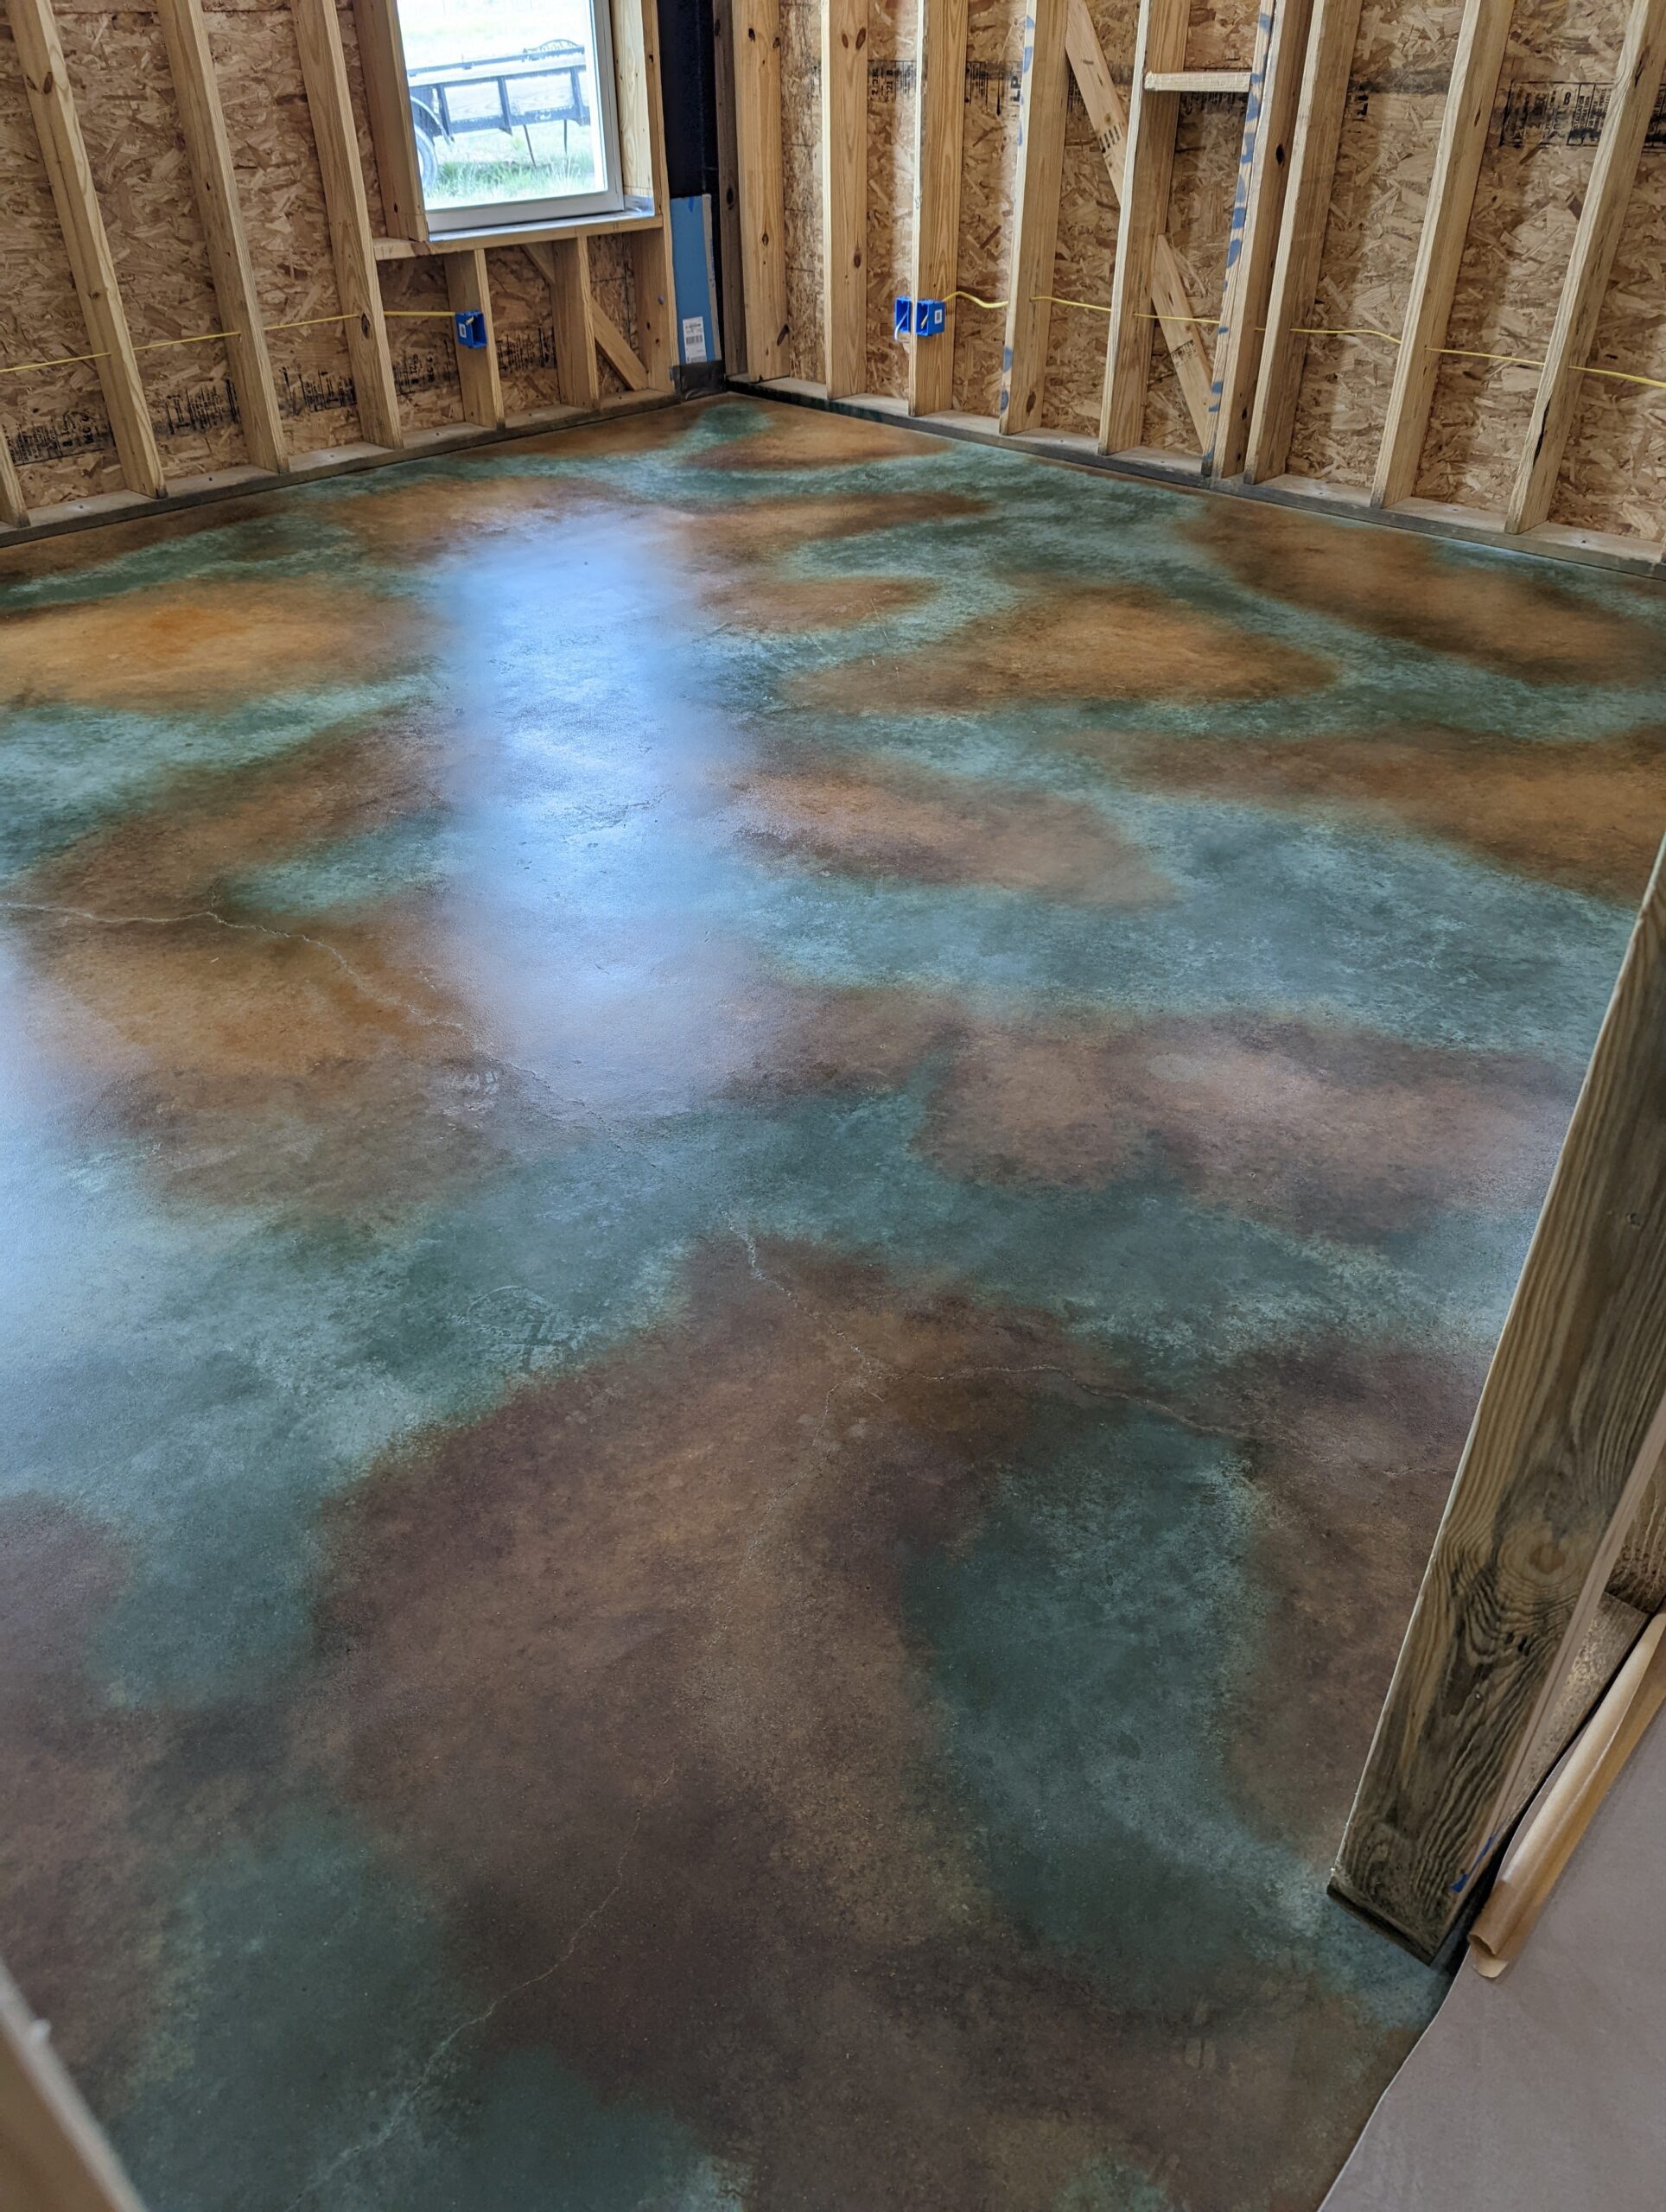 How To Acid Stain Concrete With Multiple Colors Layering Acid Stains on Concrete: Wet on Wet vs. Wet on Dry